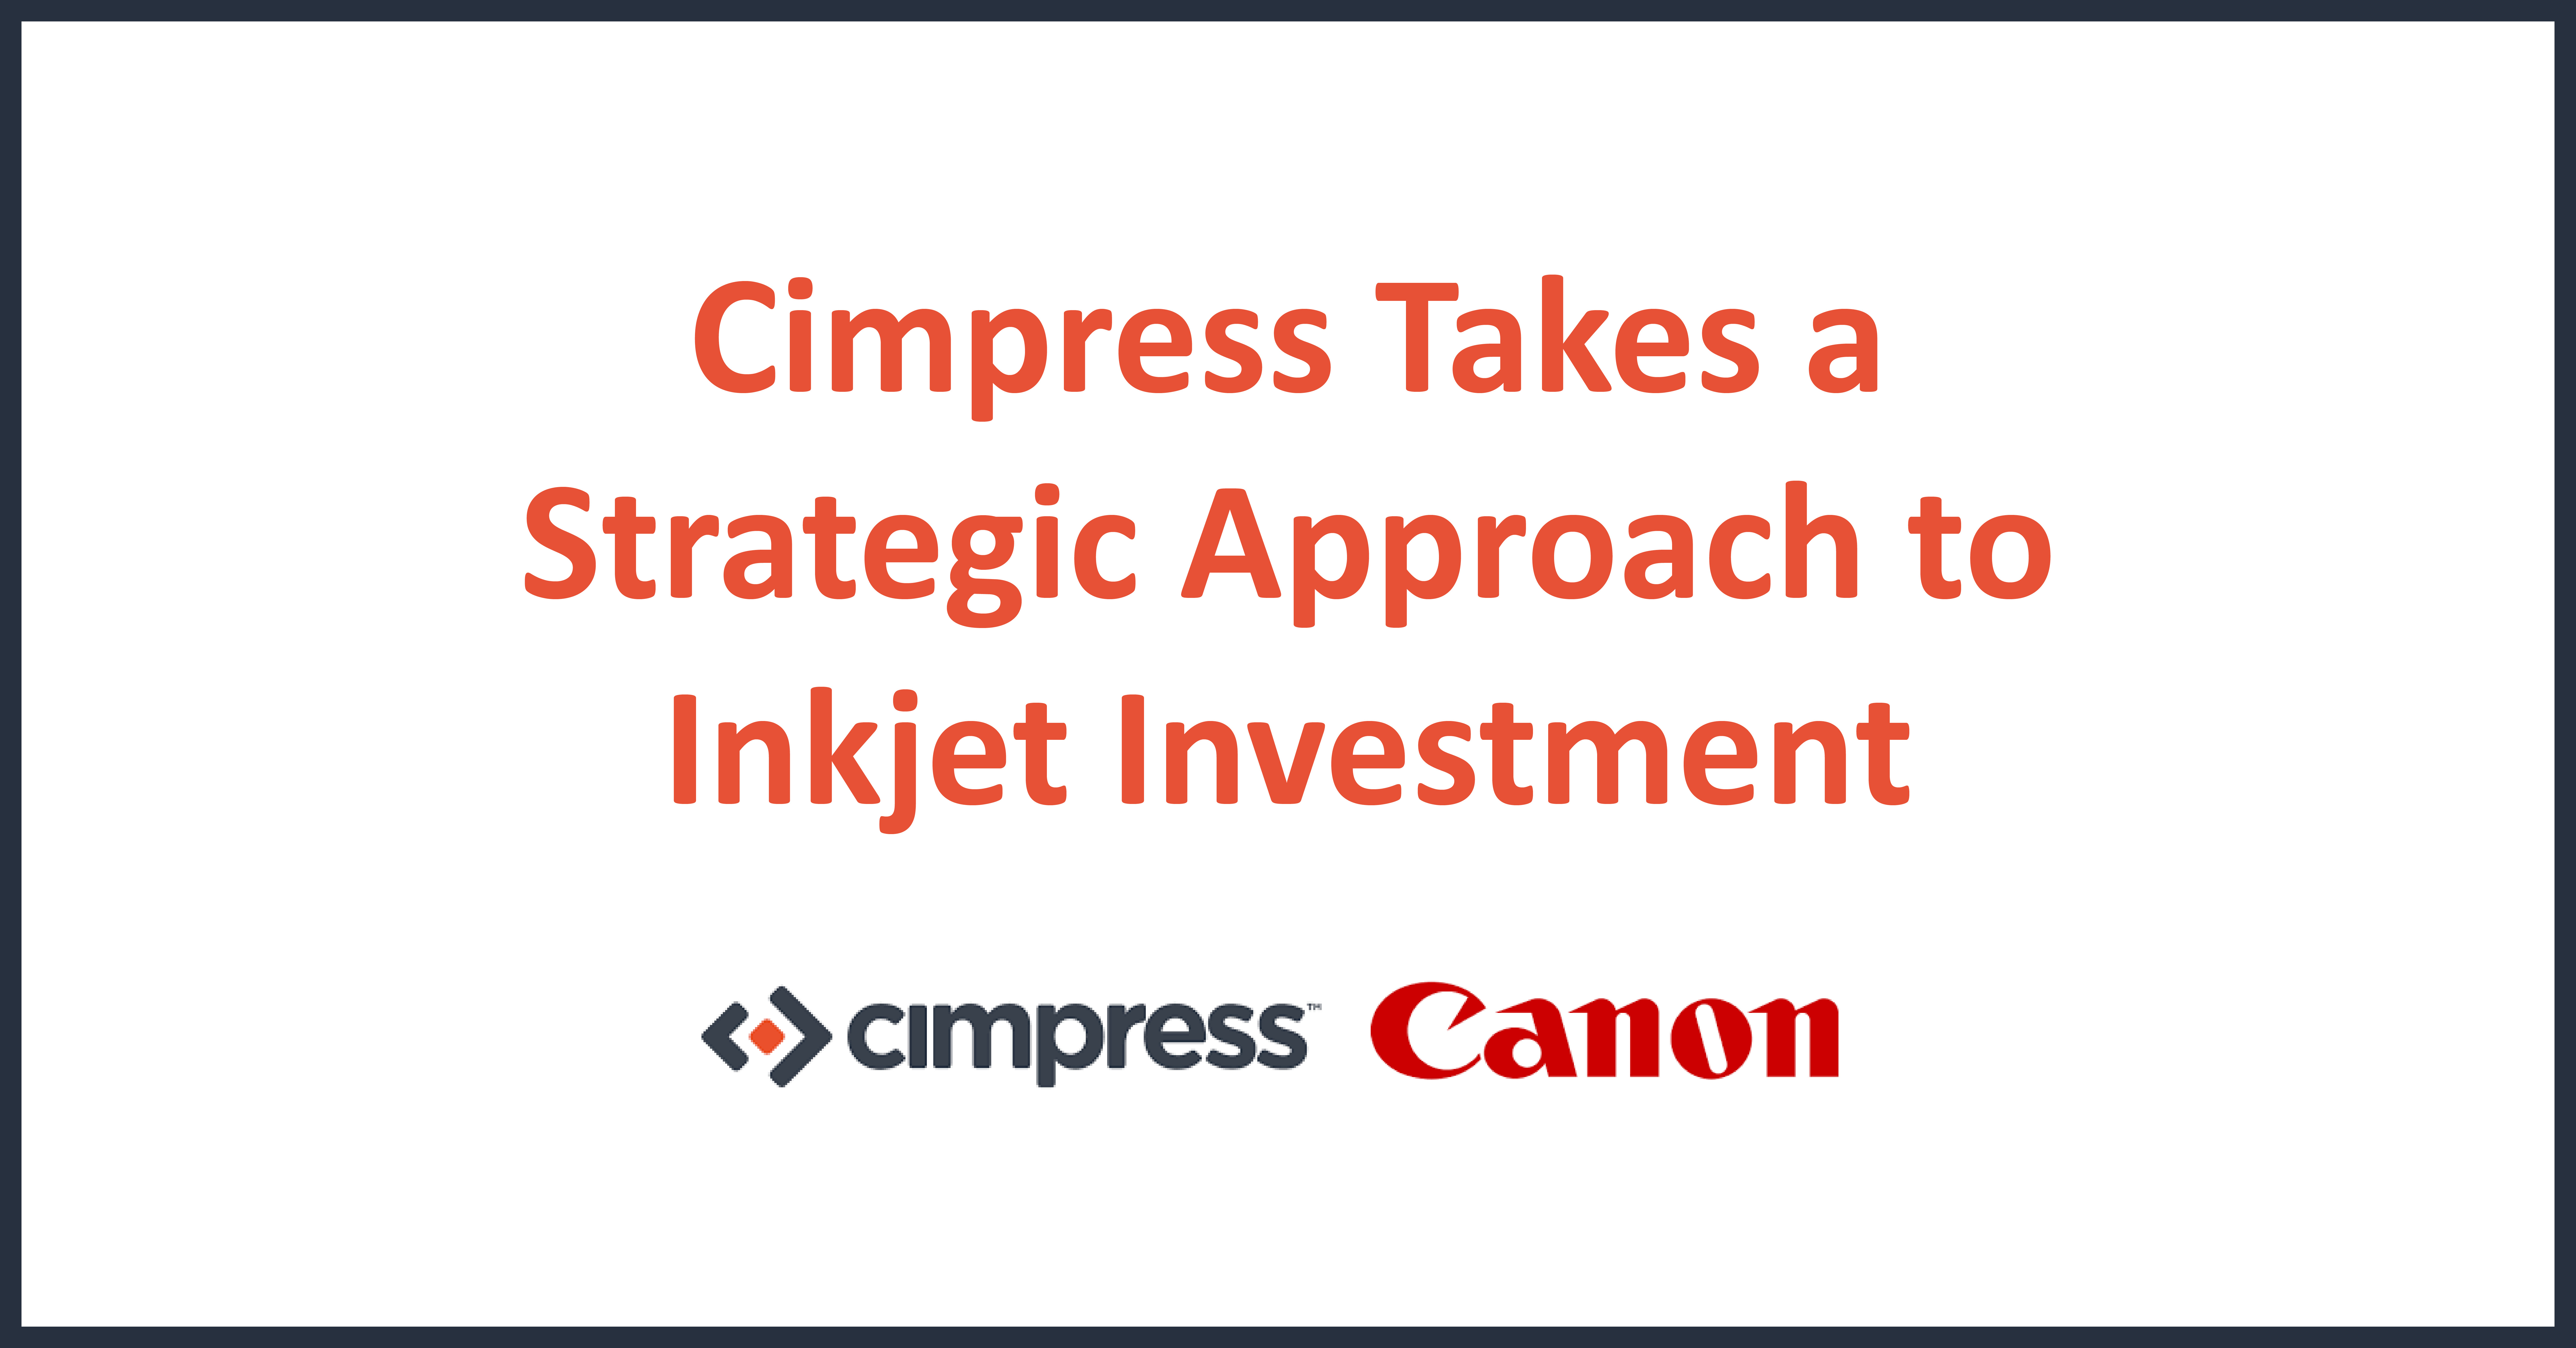 Featured image for “Cimpress Takes a Strategic Approach to Inkjet Investment ”